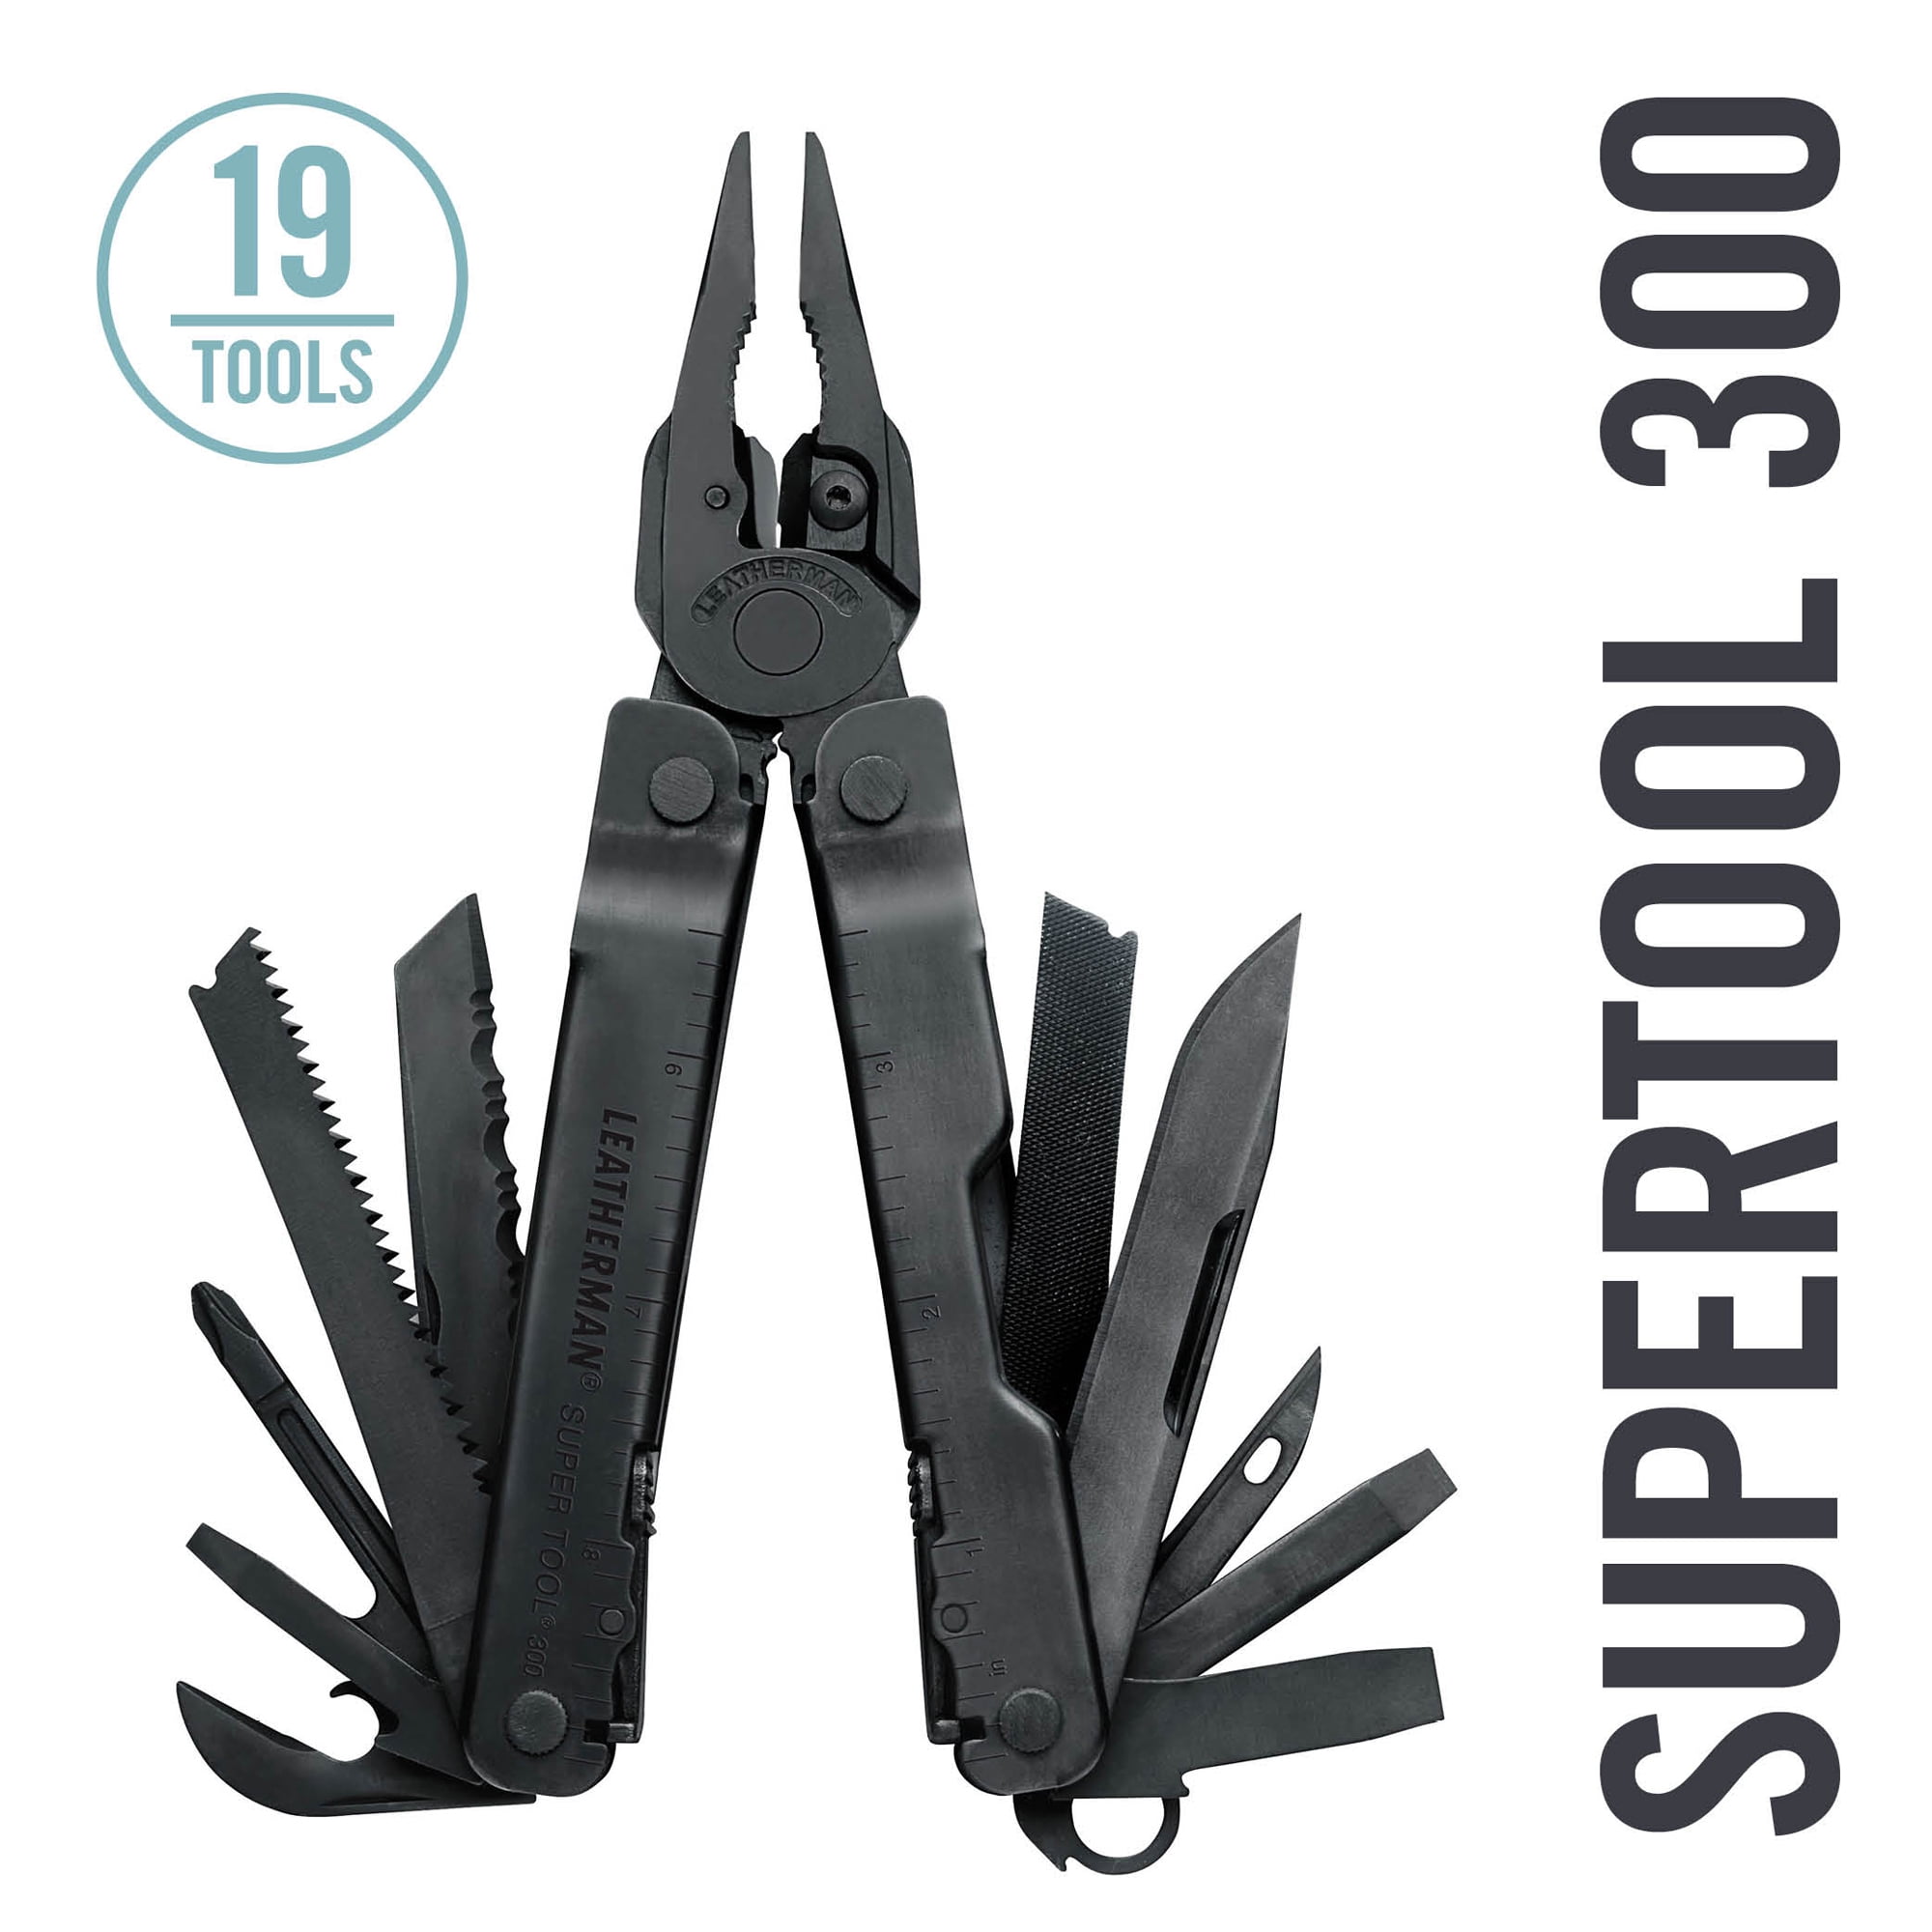 Leatherman Super Tool 300 Multi-Tool, 1 Count - Pay Less Super Markets